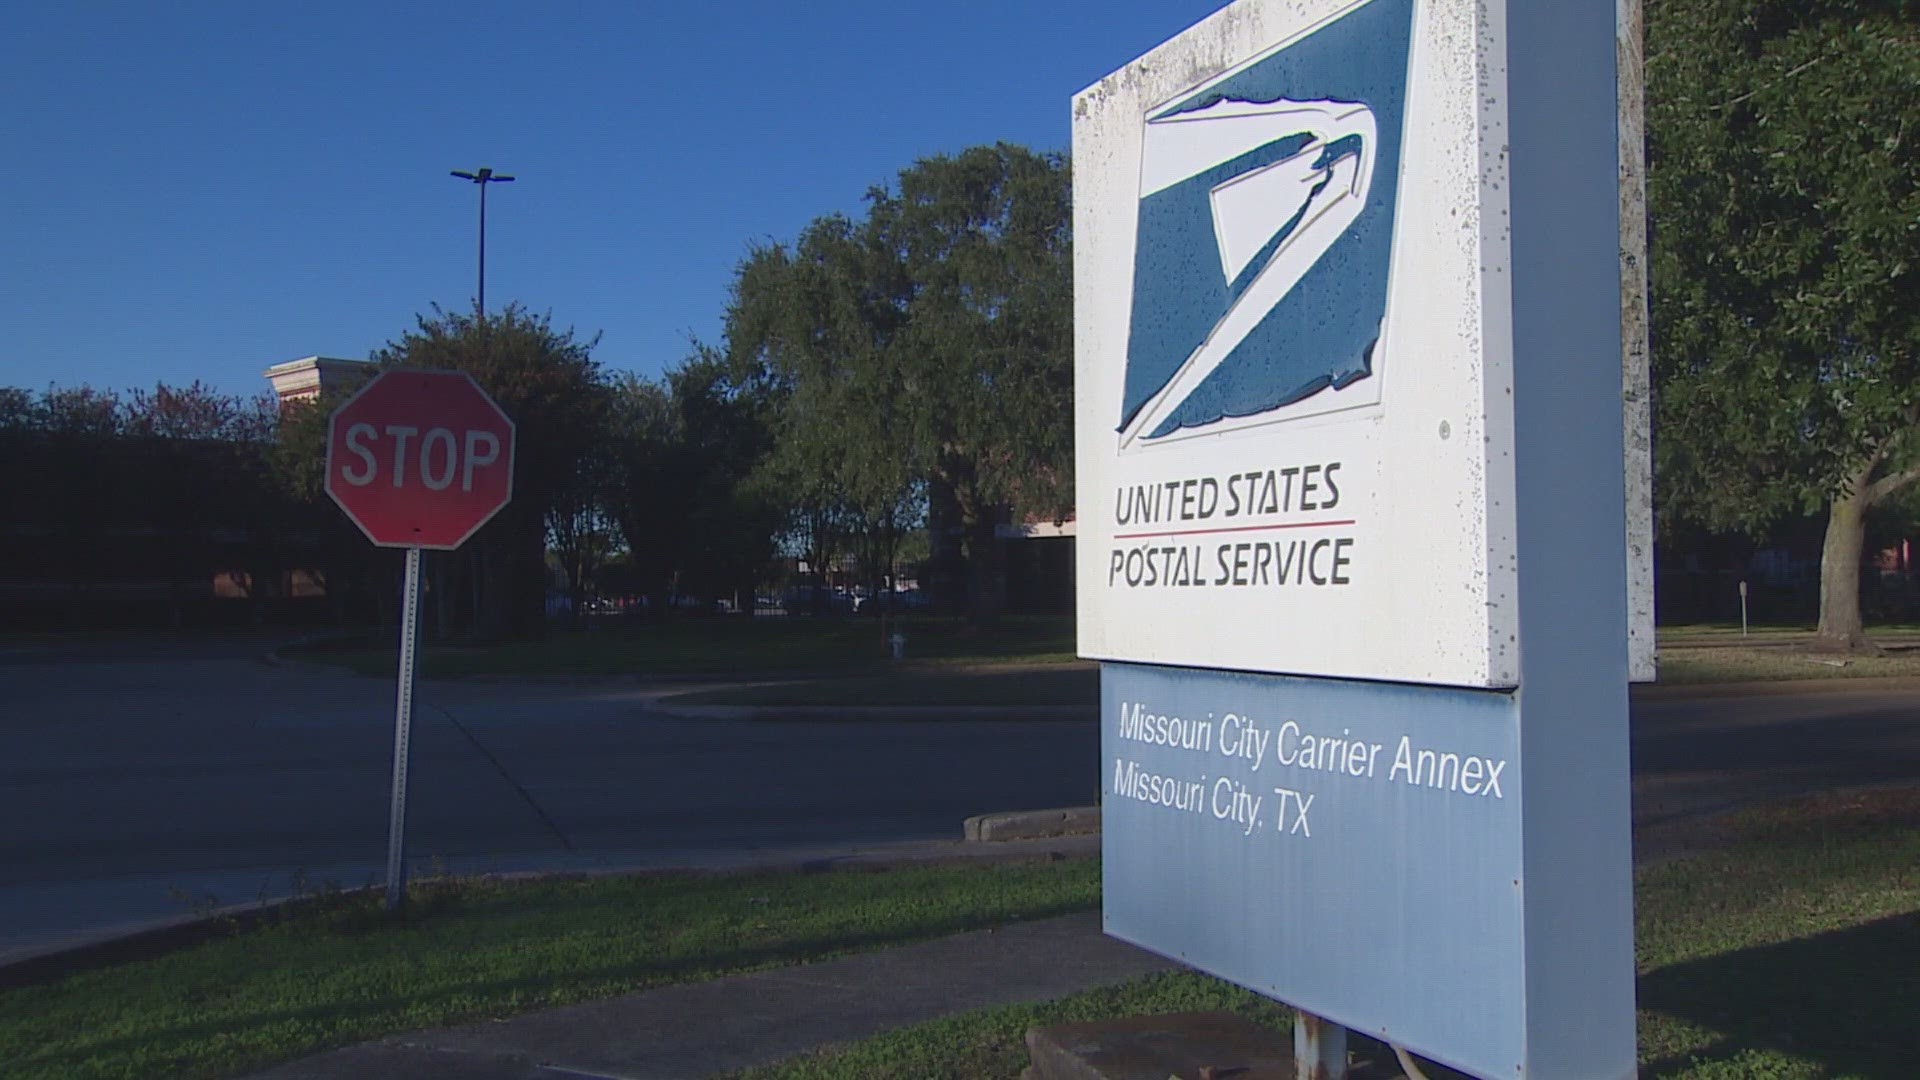 For the past week, we've heard several stories about undelivered packages being held at a USPS processing center in Missouri City.